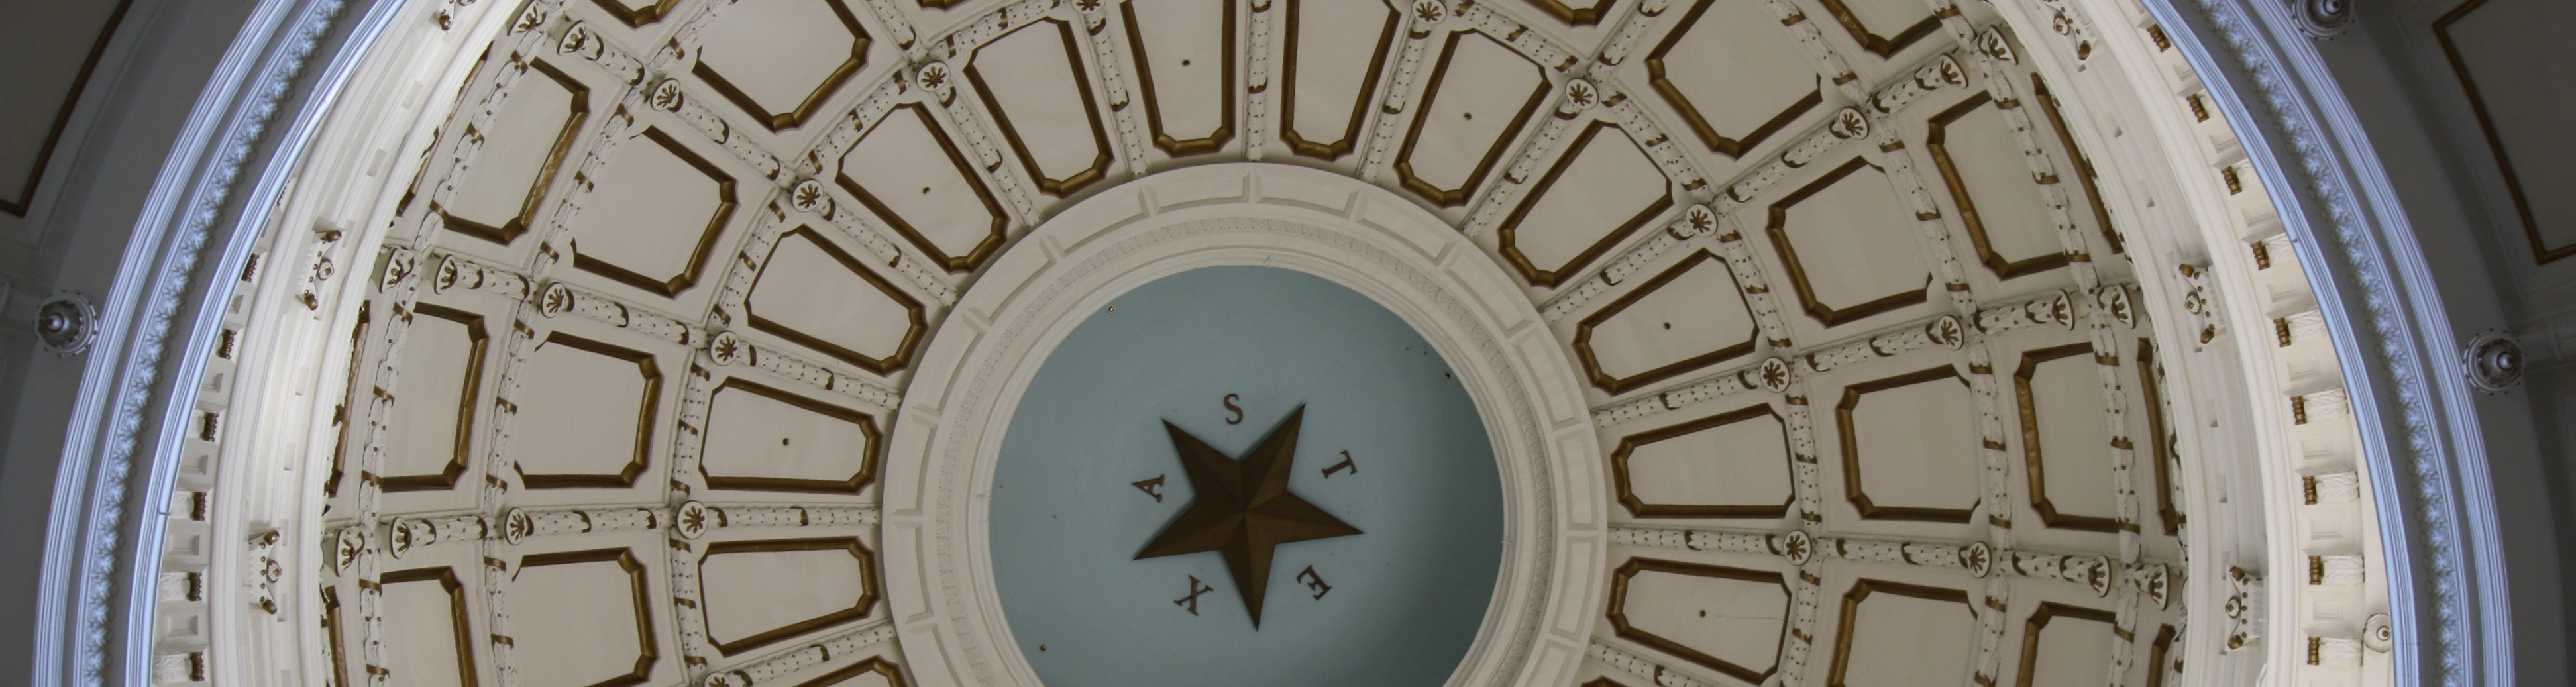 Texas state capital dome